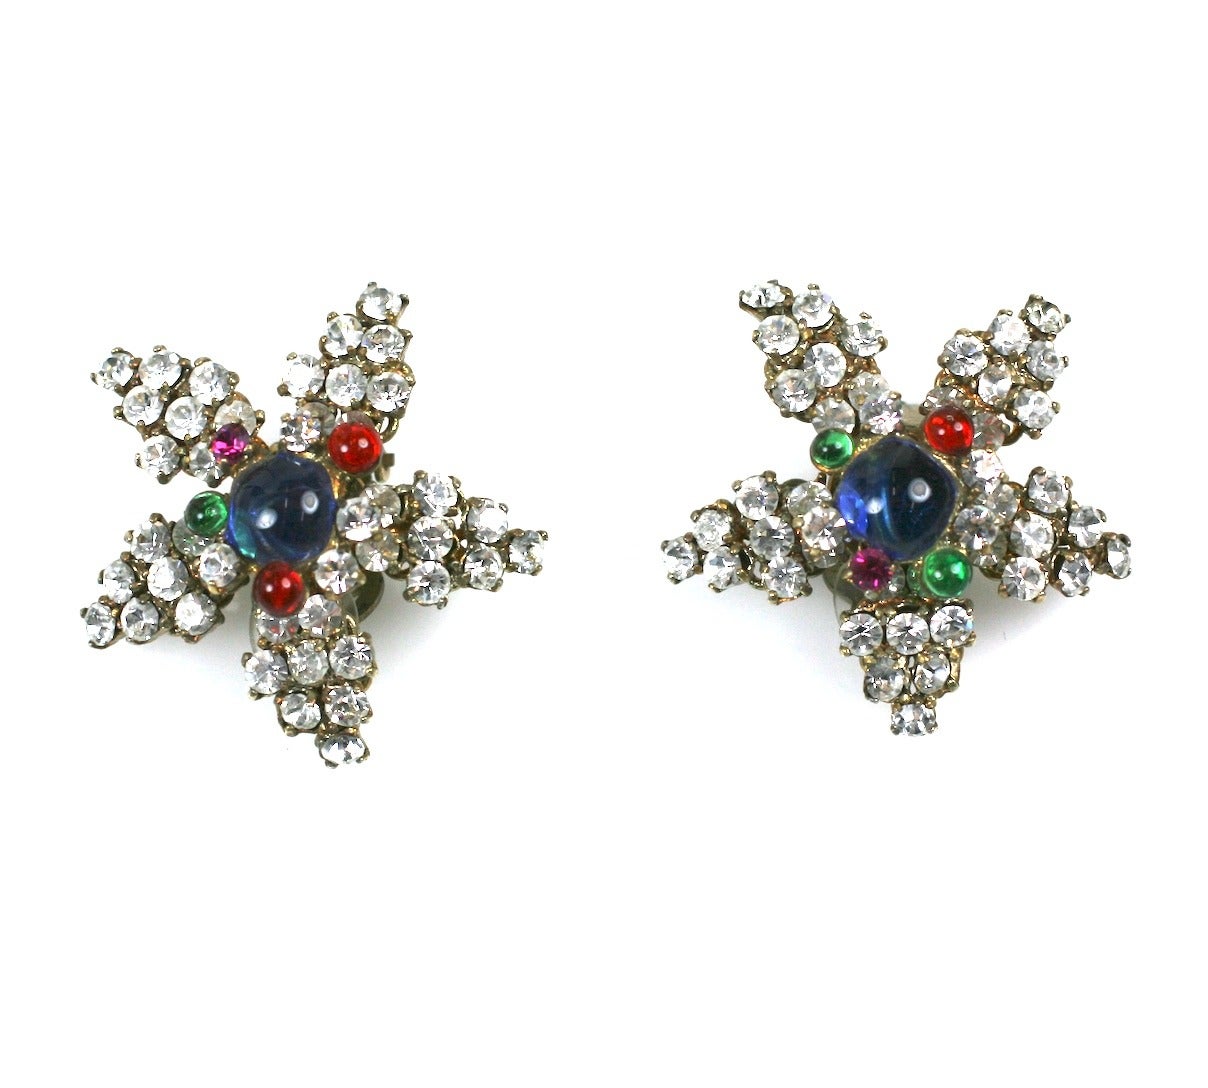  Maison Gripoix for Chanel Poured Glass Pave Star Earrings In Excellent Condition For Sale In New York, NY